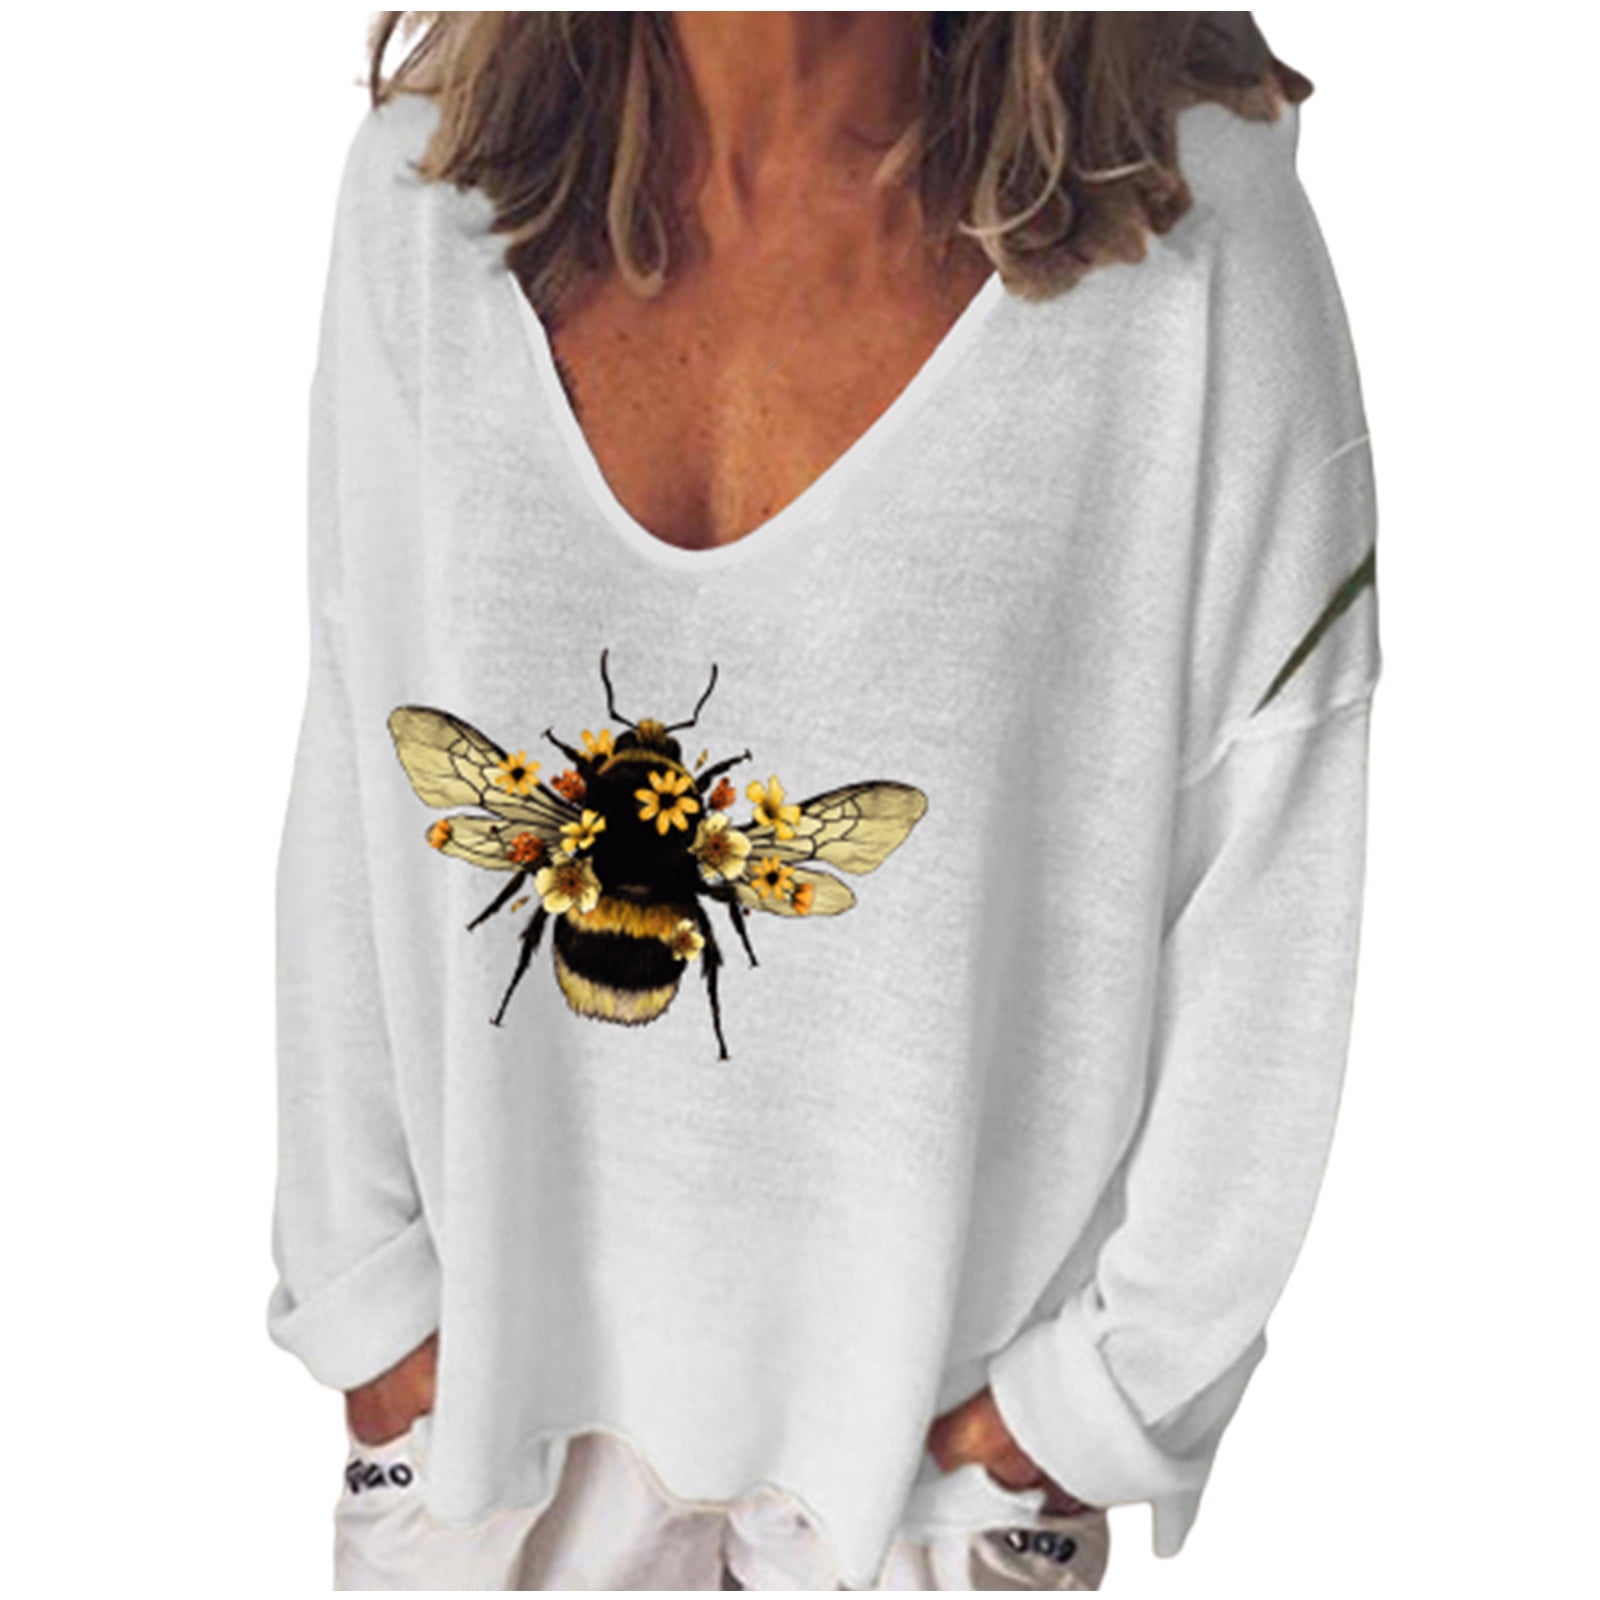 Bee Strong Women Cute Bee Graphic Shirt Inspirational Bees T